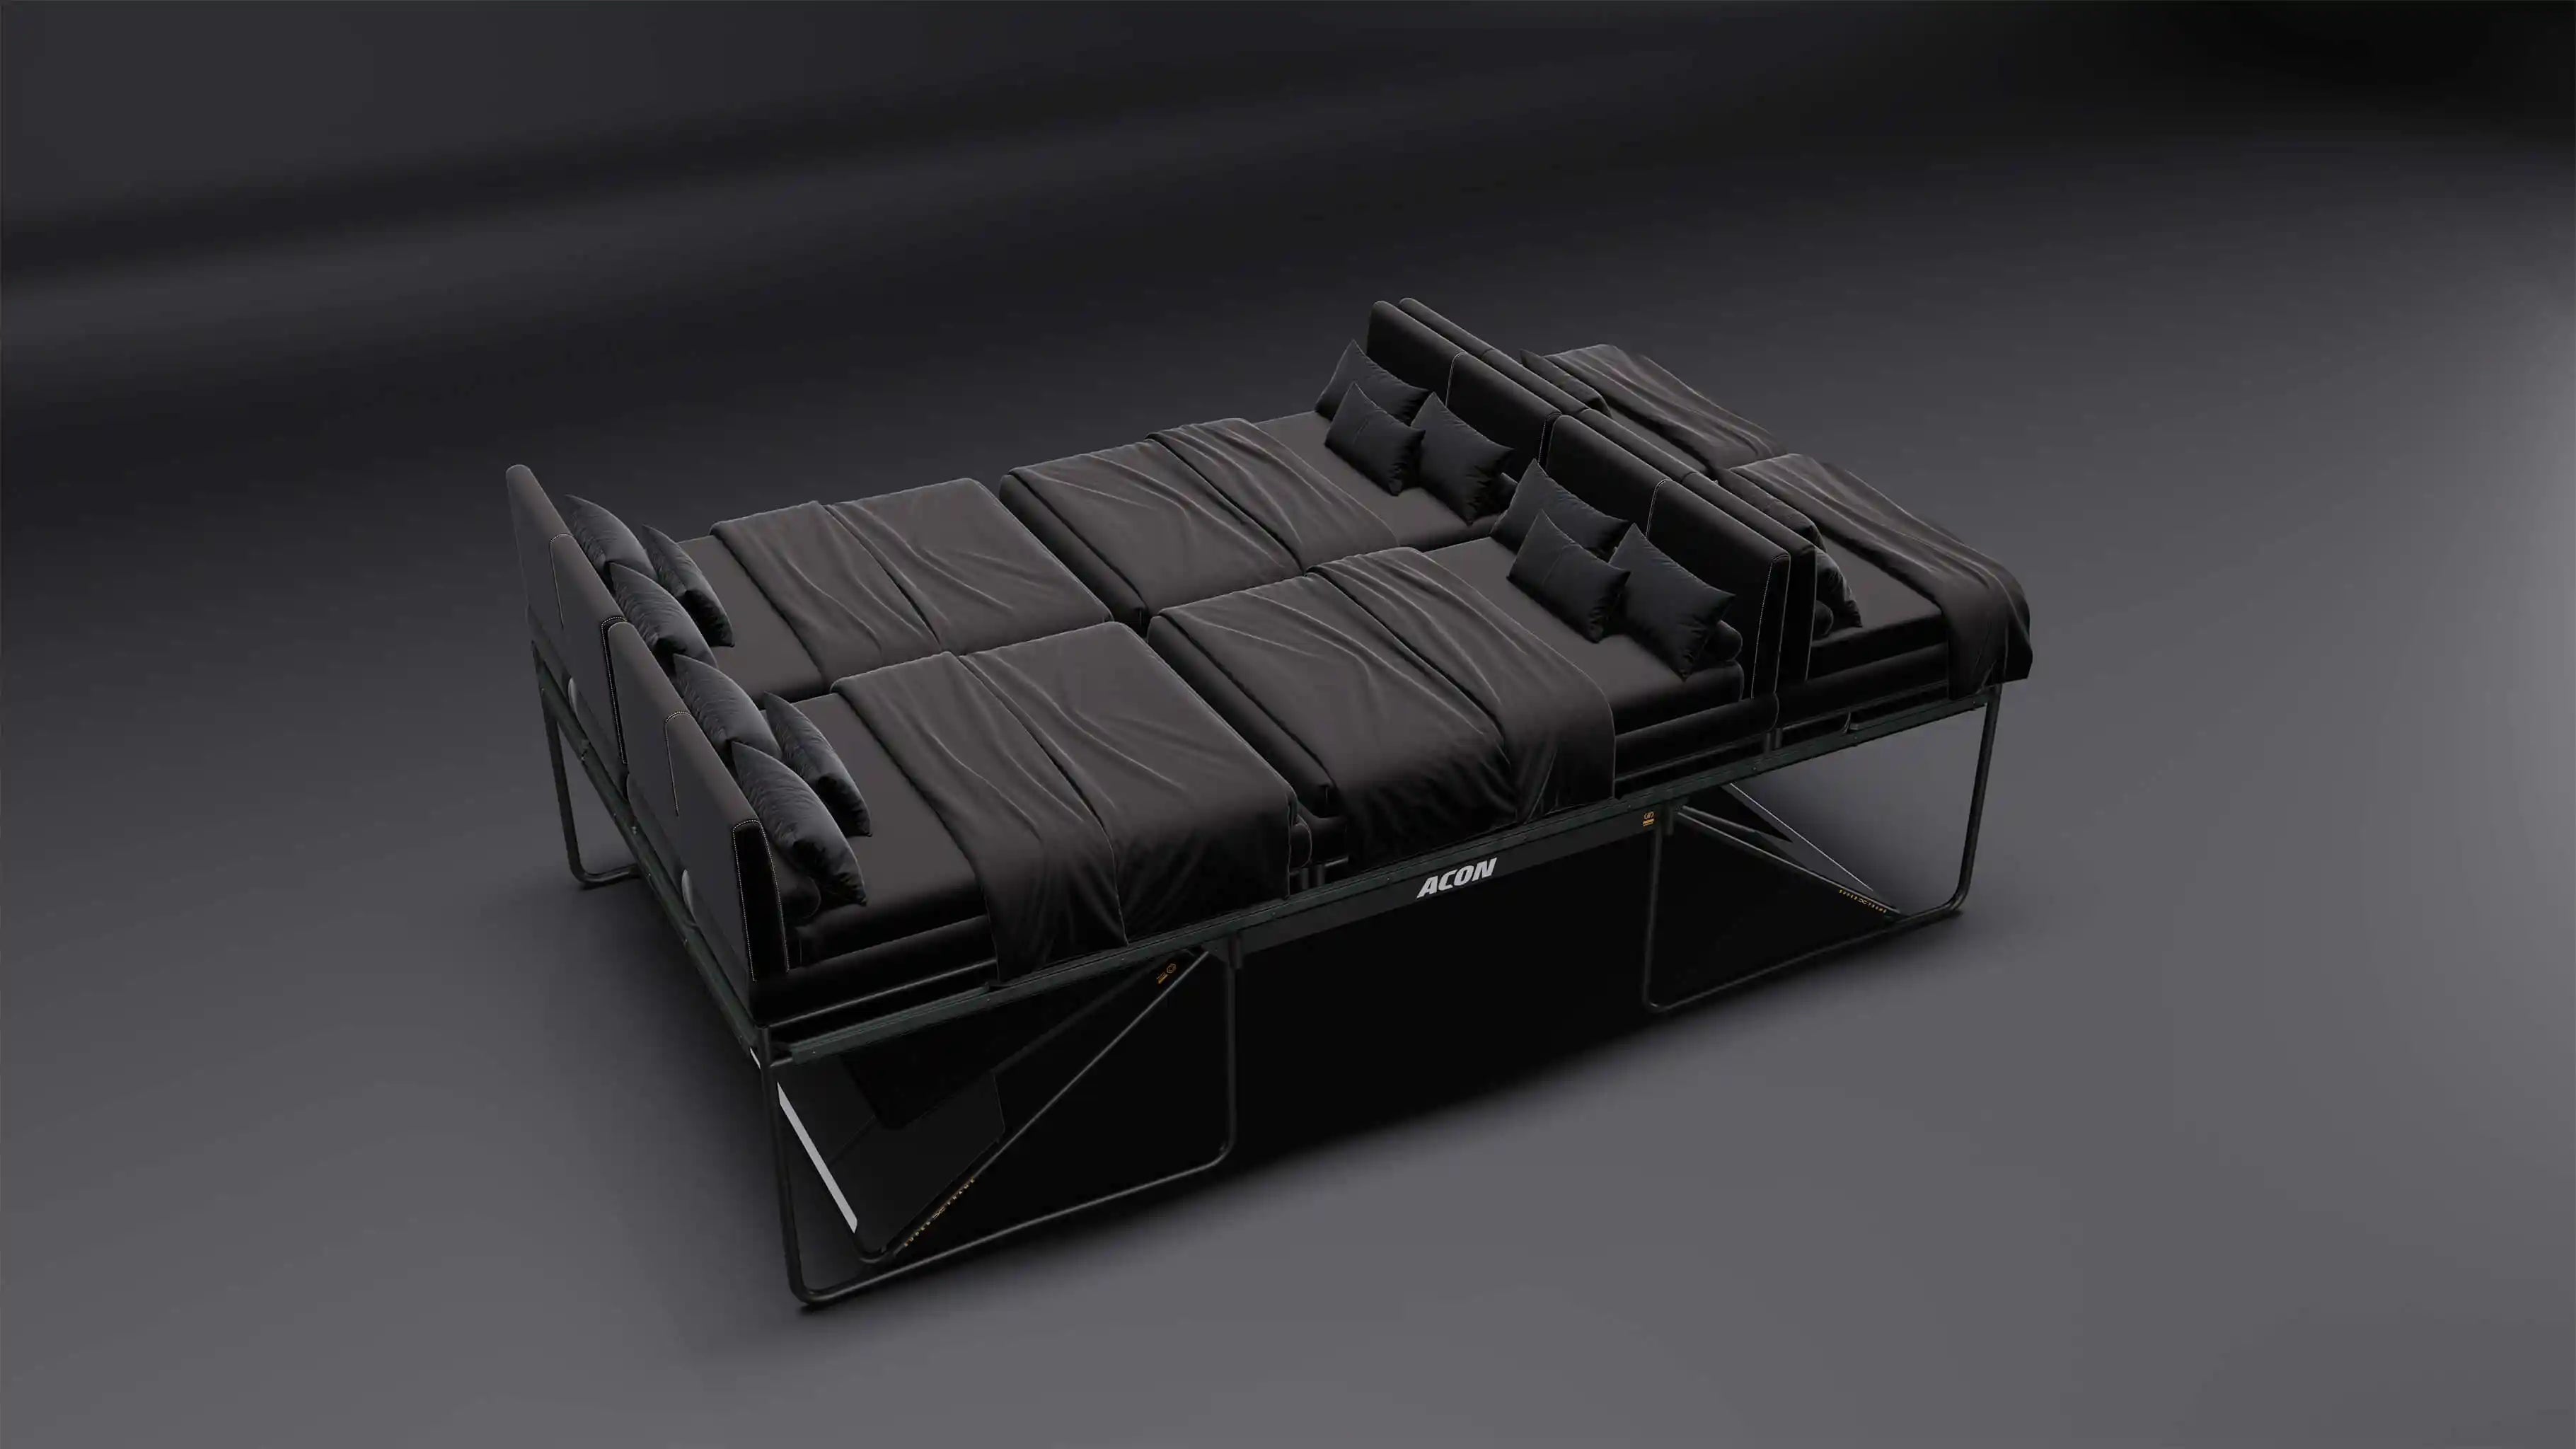 Acon X Trampoline is the size of several king size beds.